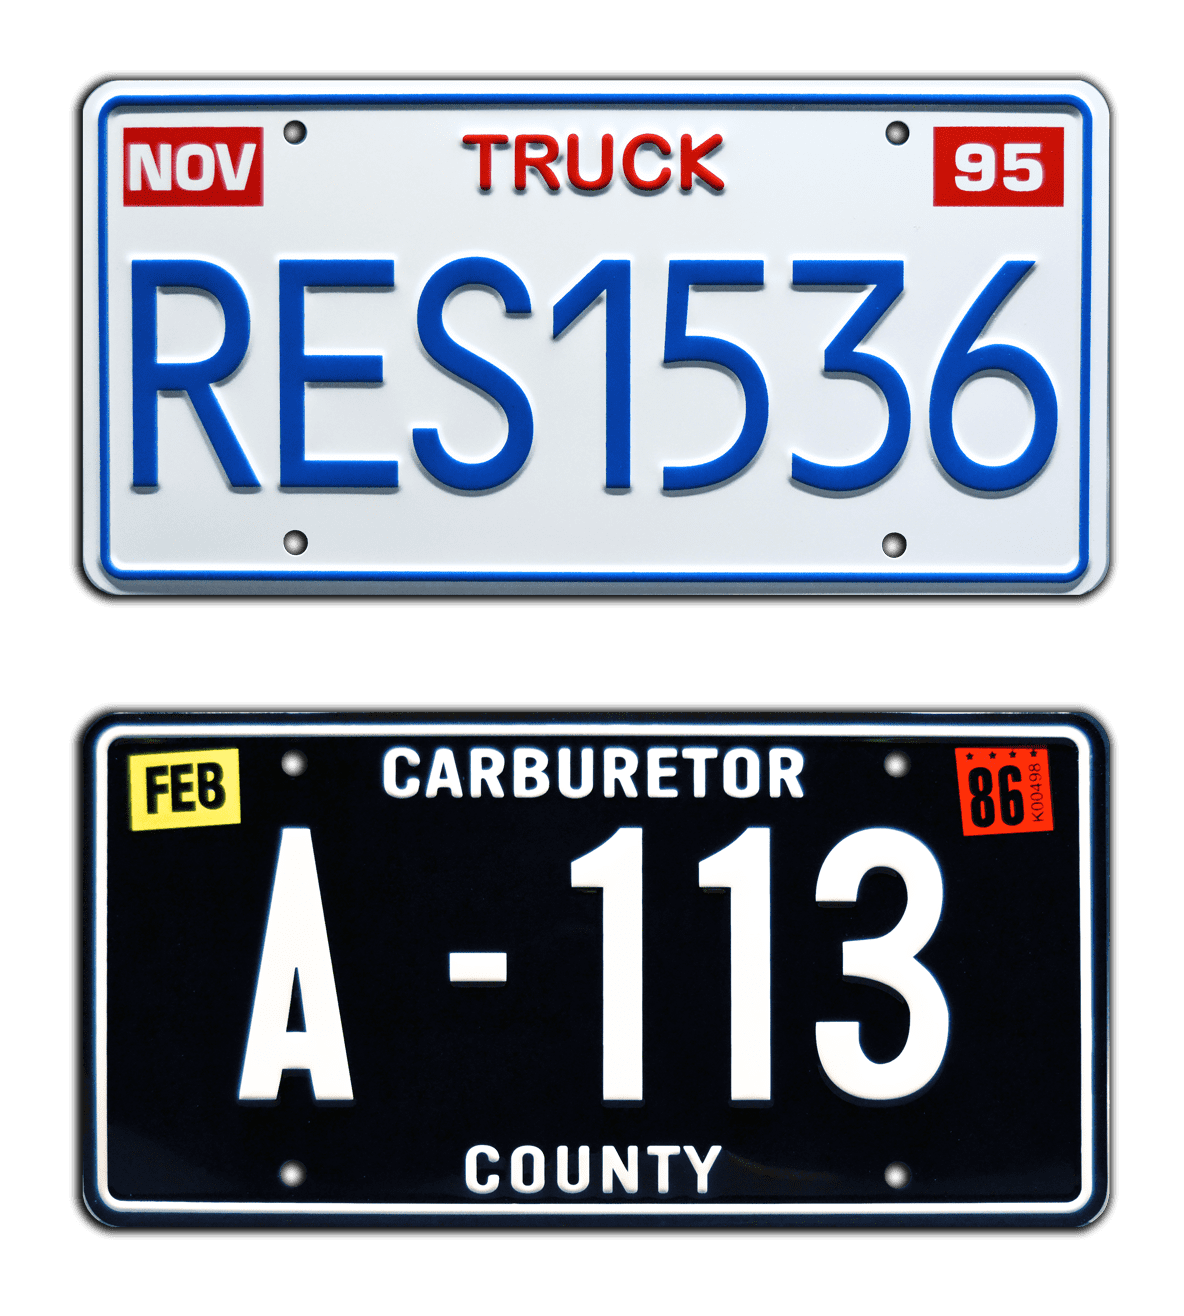  15 States Replica Car License Plates, US States Auto Number  Tags, Room Man Cave Garage Sports Bar Decor : Automotive